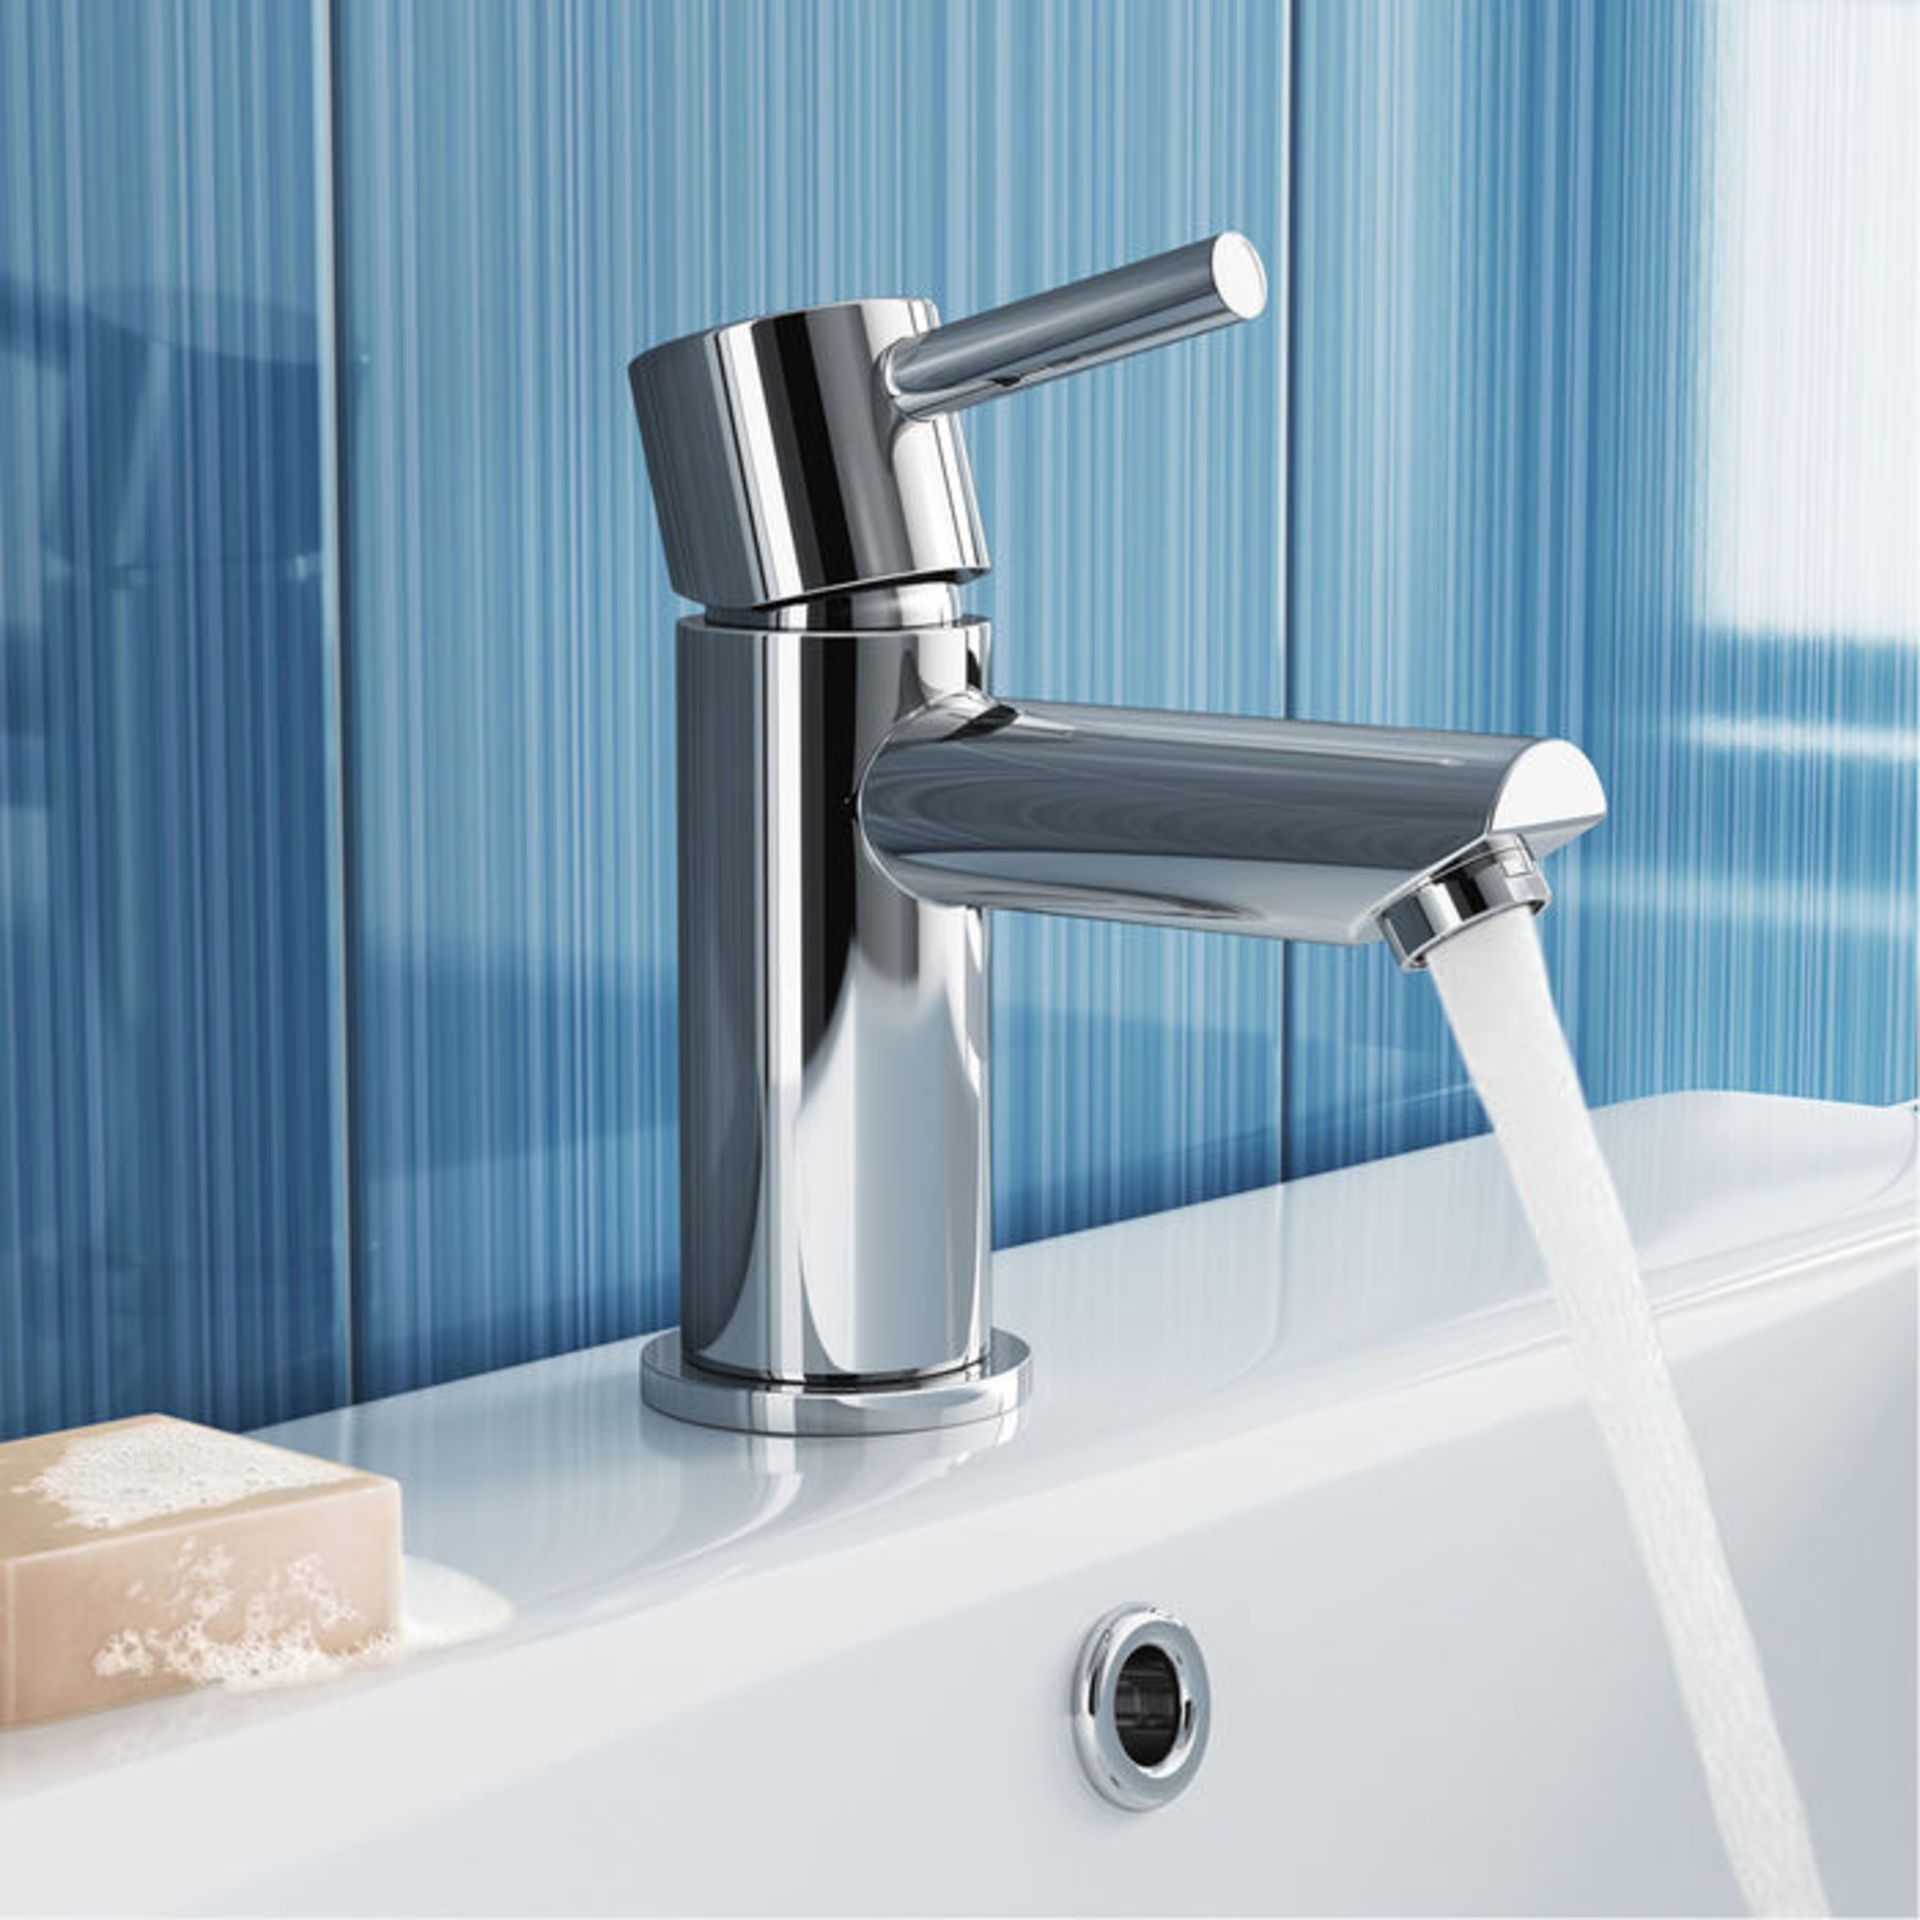 (GR89) Gladstone II Cloakroom Basin Mixer Tap. Chrome plated solid brass 26mm mixer cartridge - Image 3 of 3